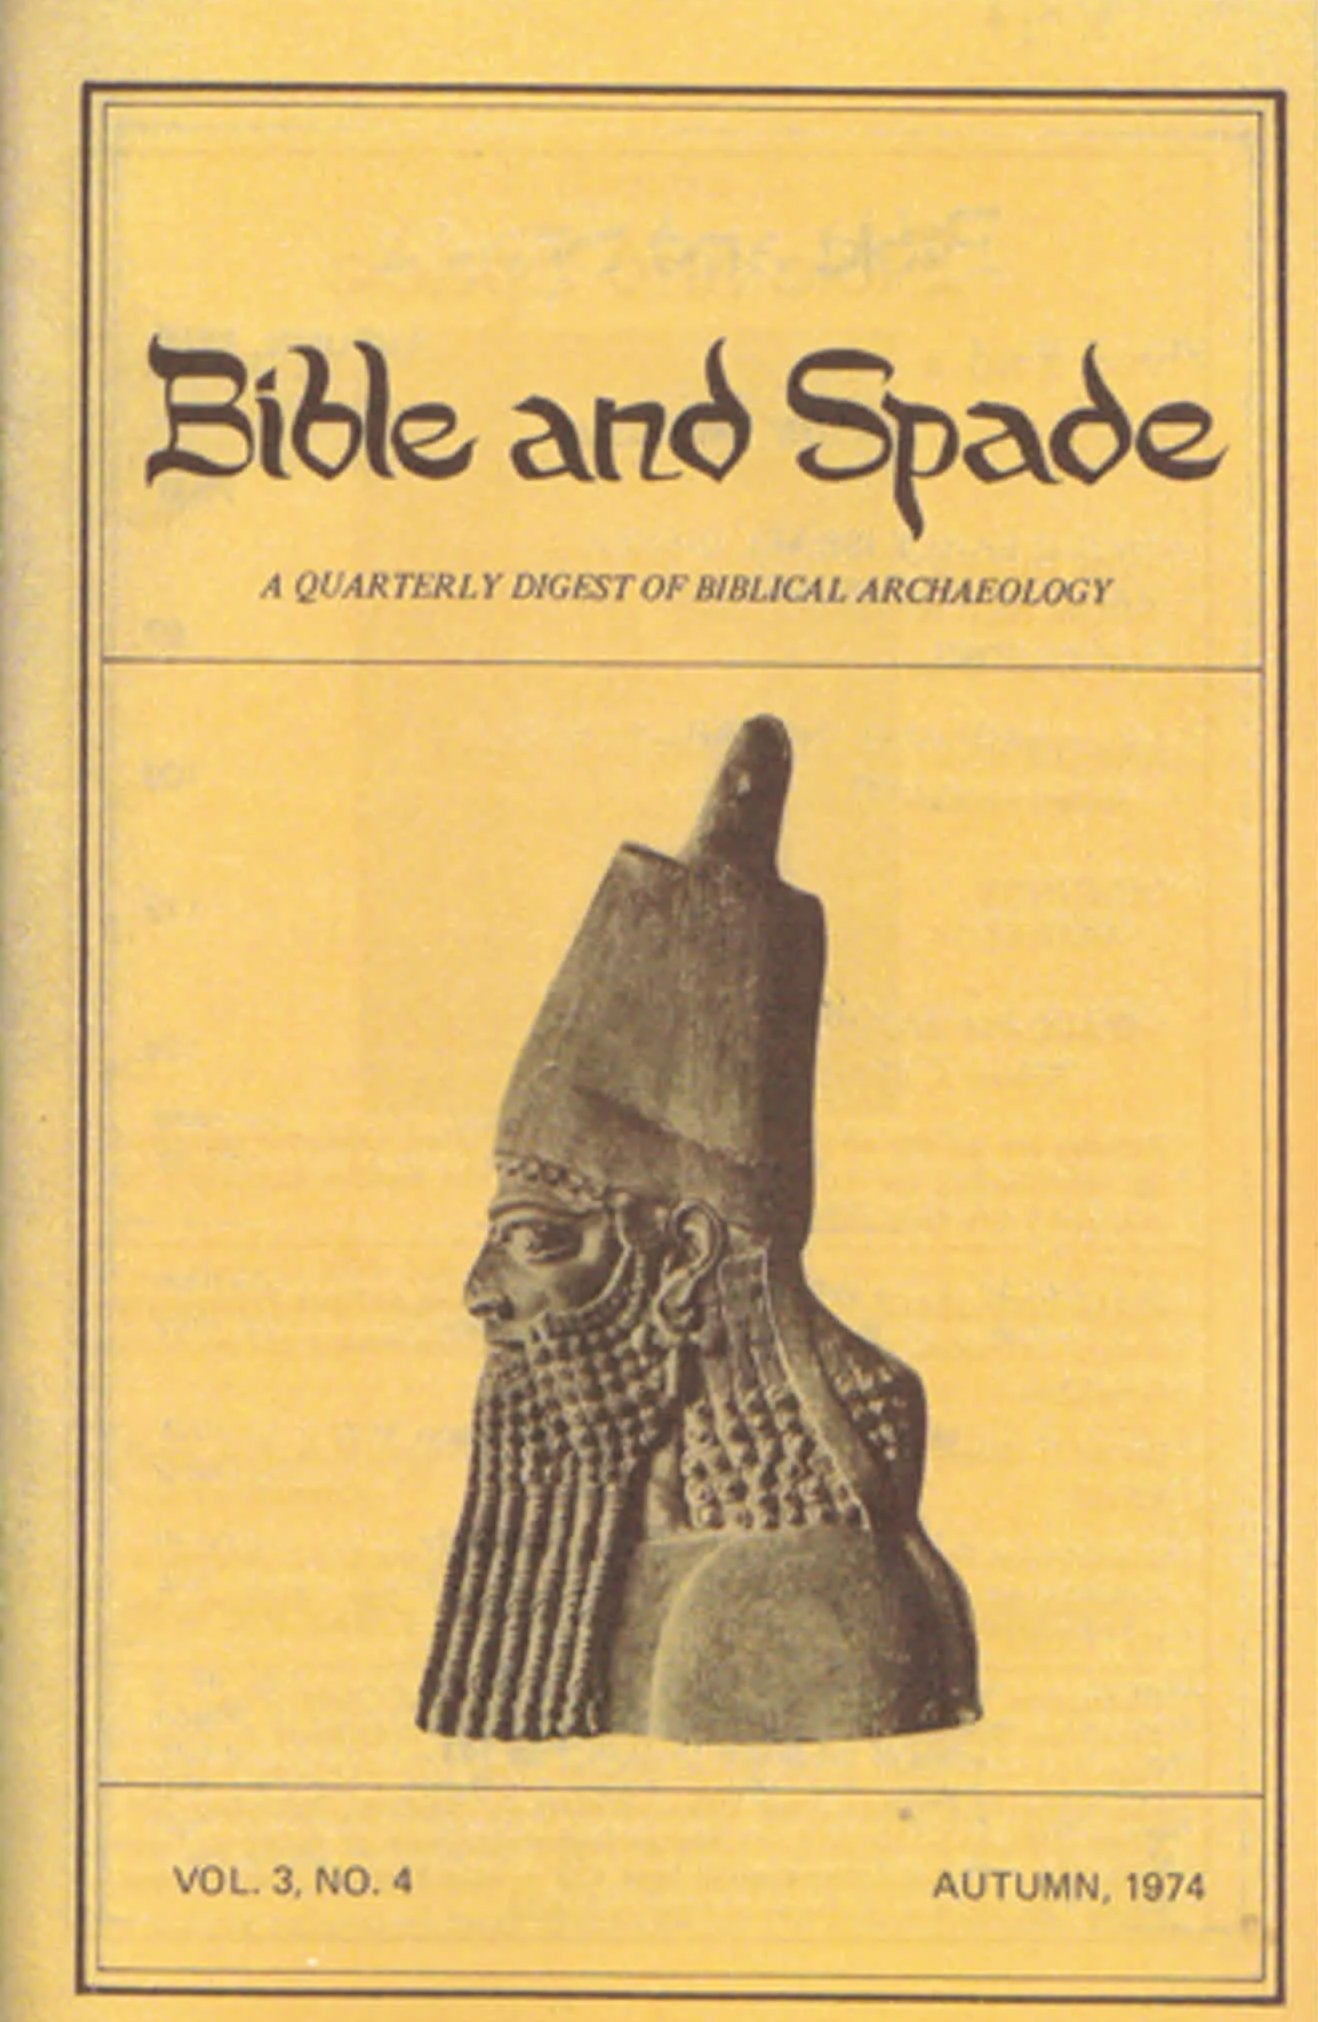 Four issues of BIBLE and SPADE produced in 1974